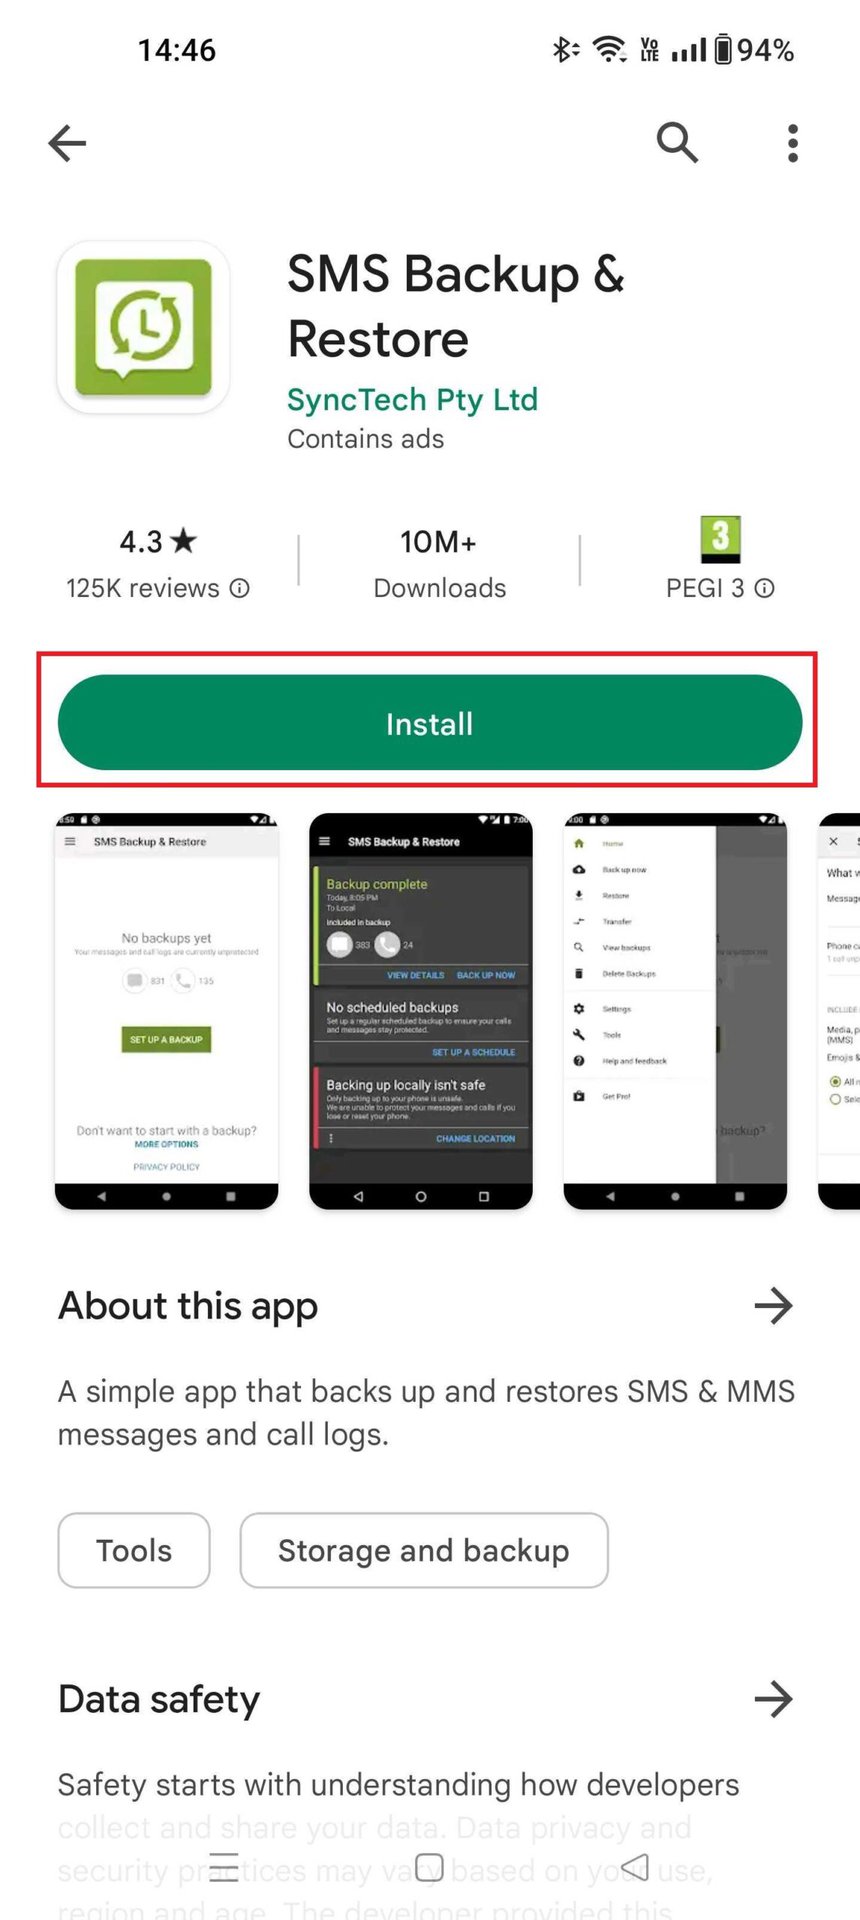 SMS Backup and Restore App on Play Store